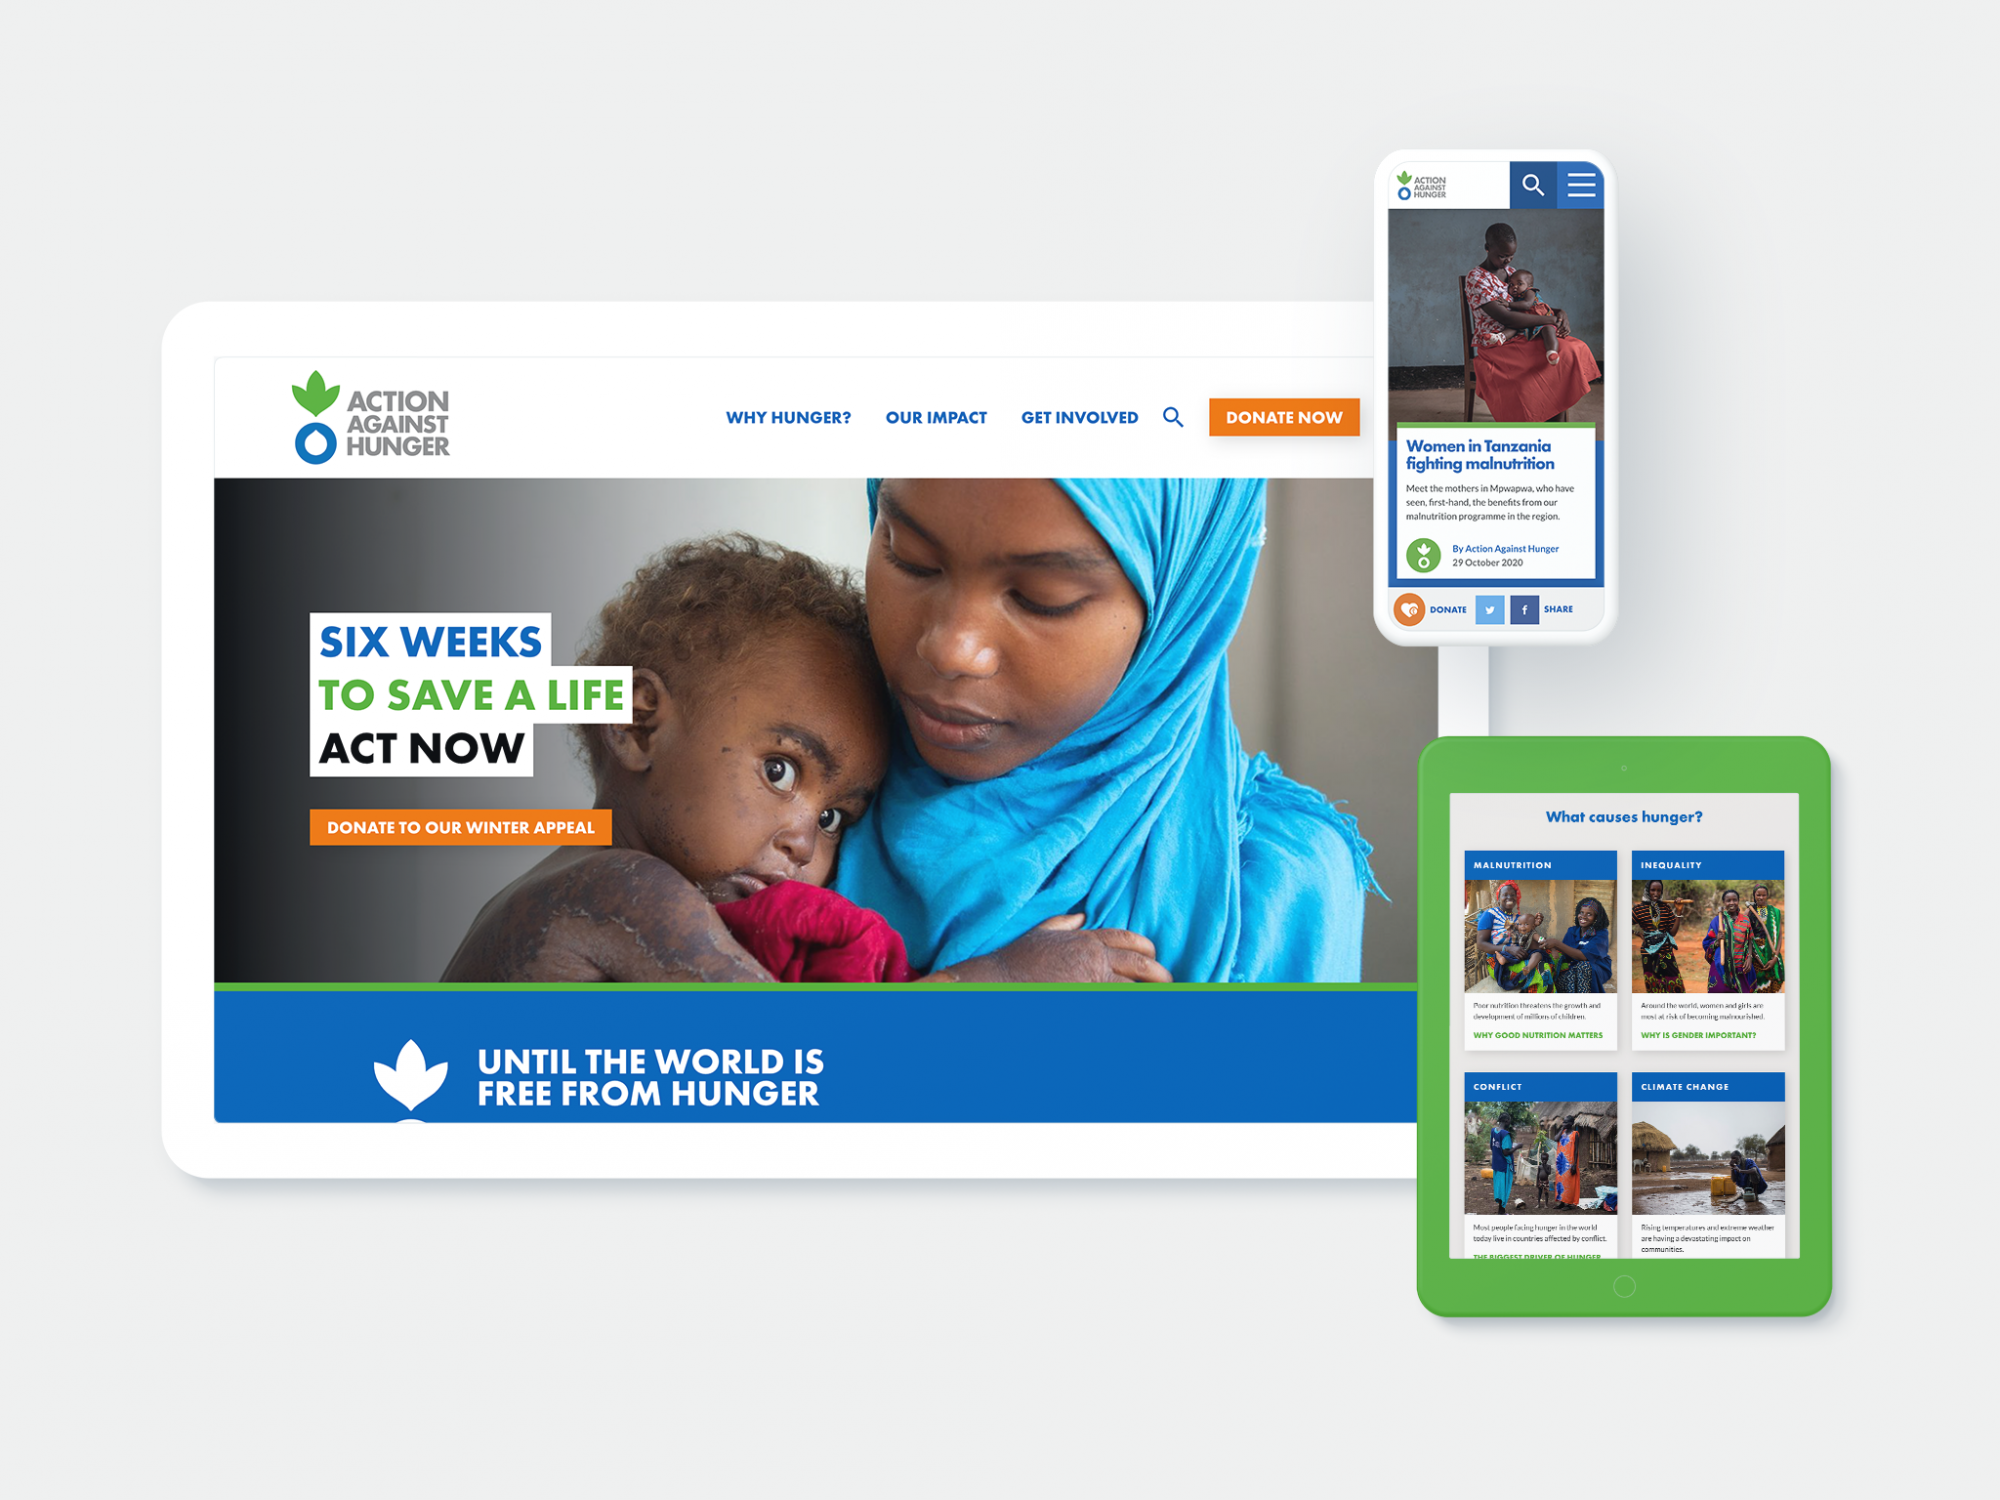 Action Against Hunger website design shown on various devices